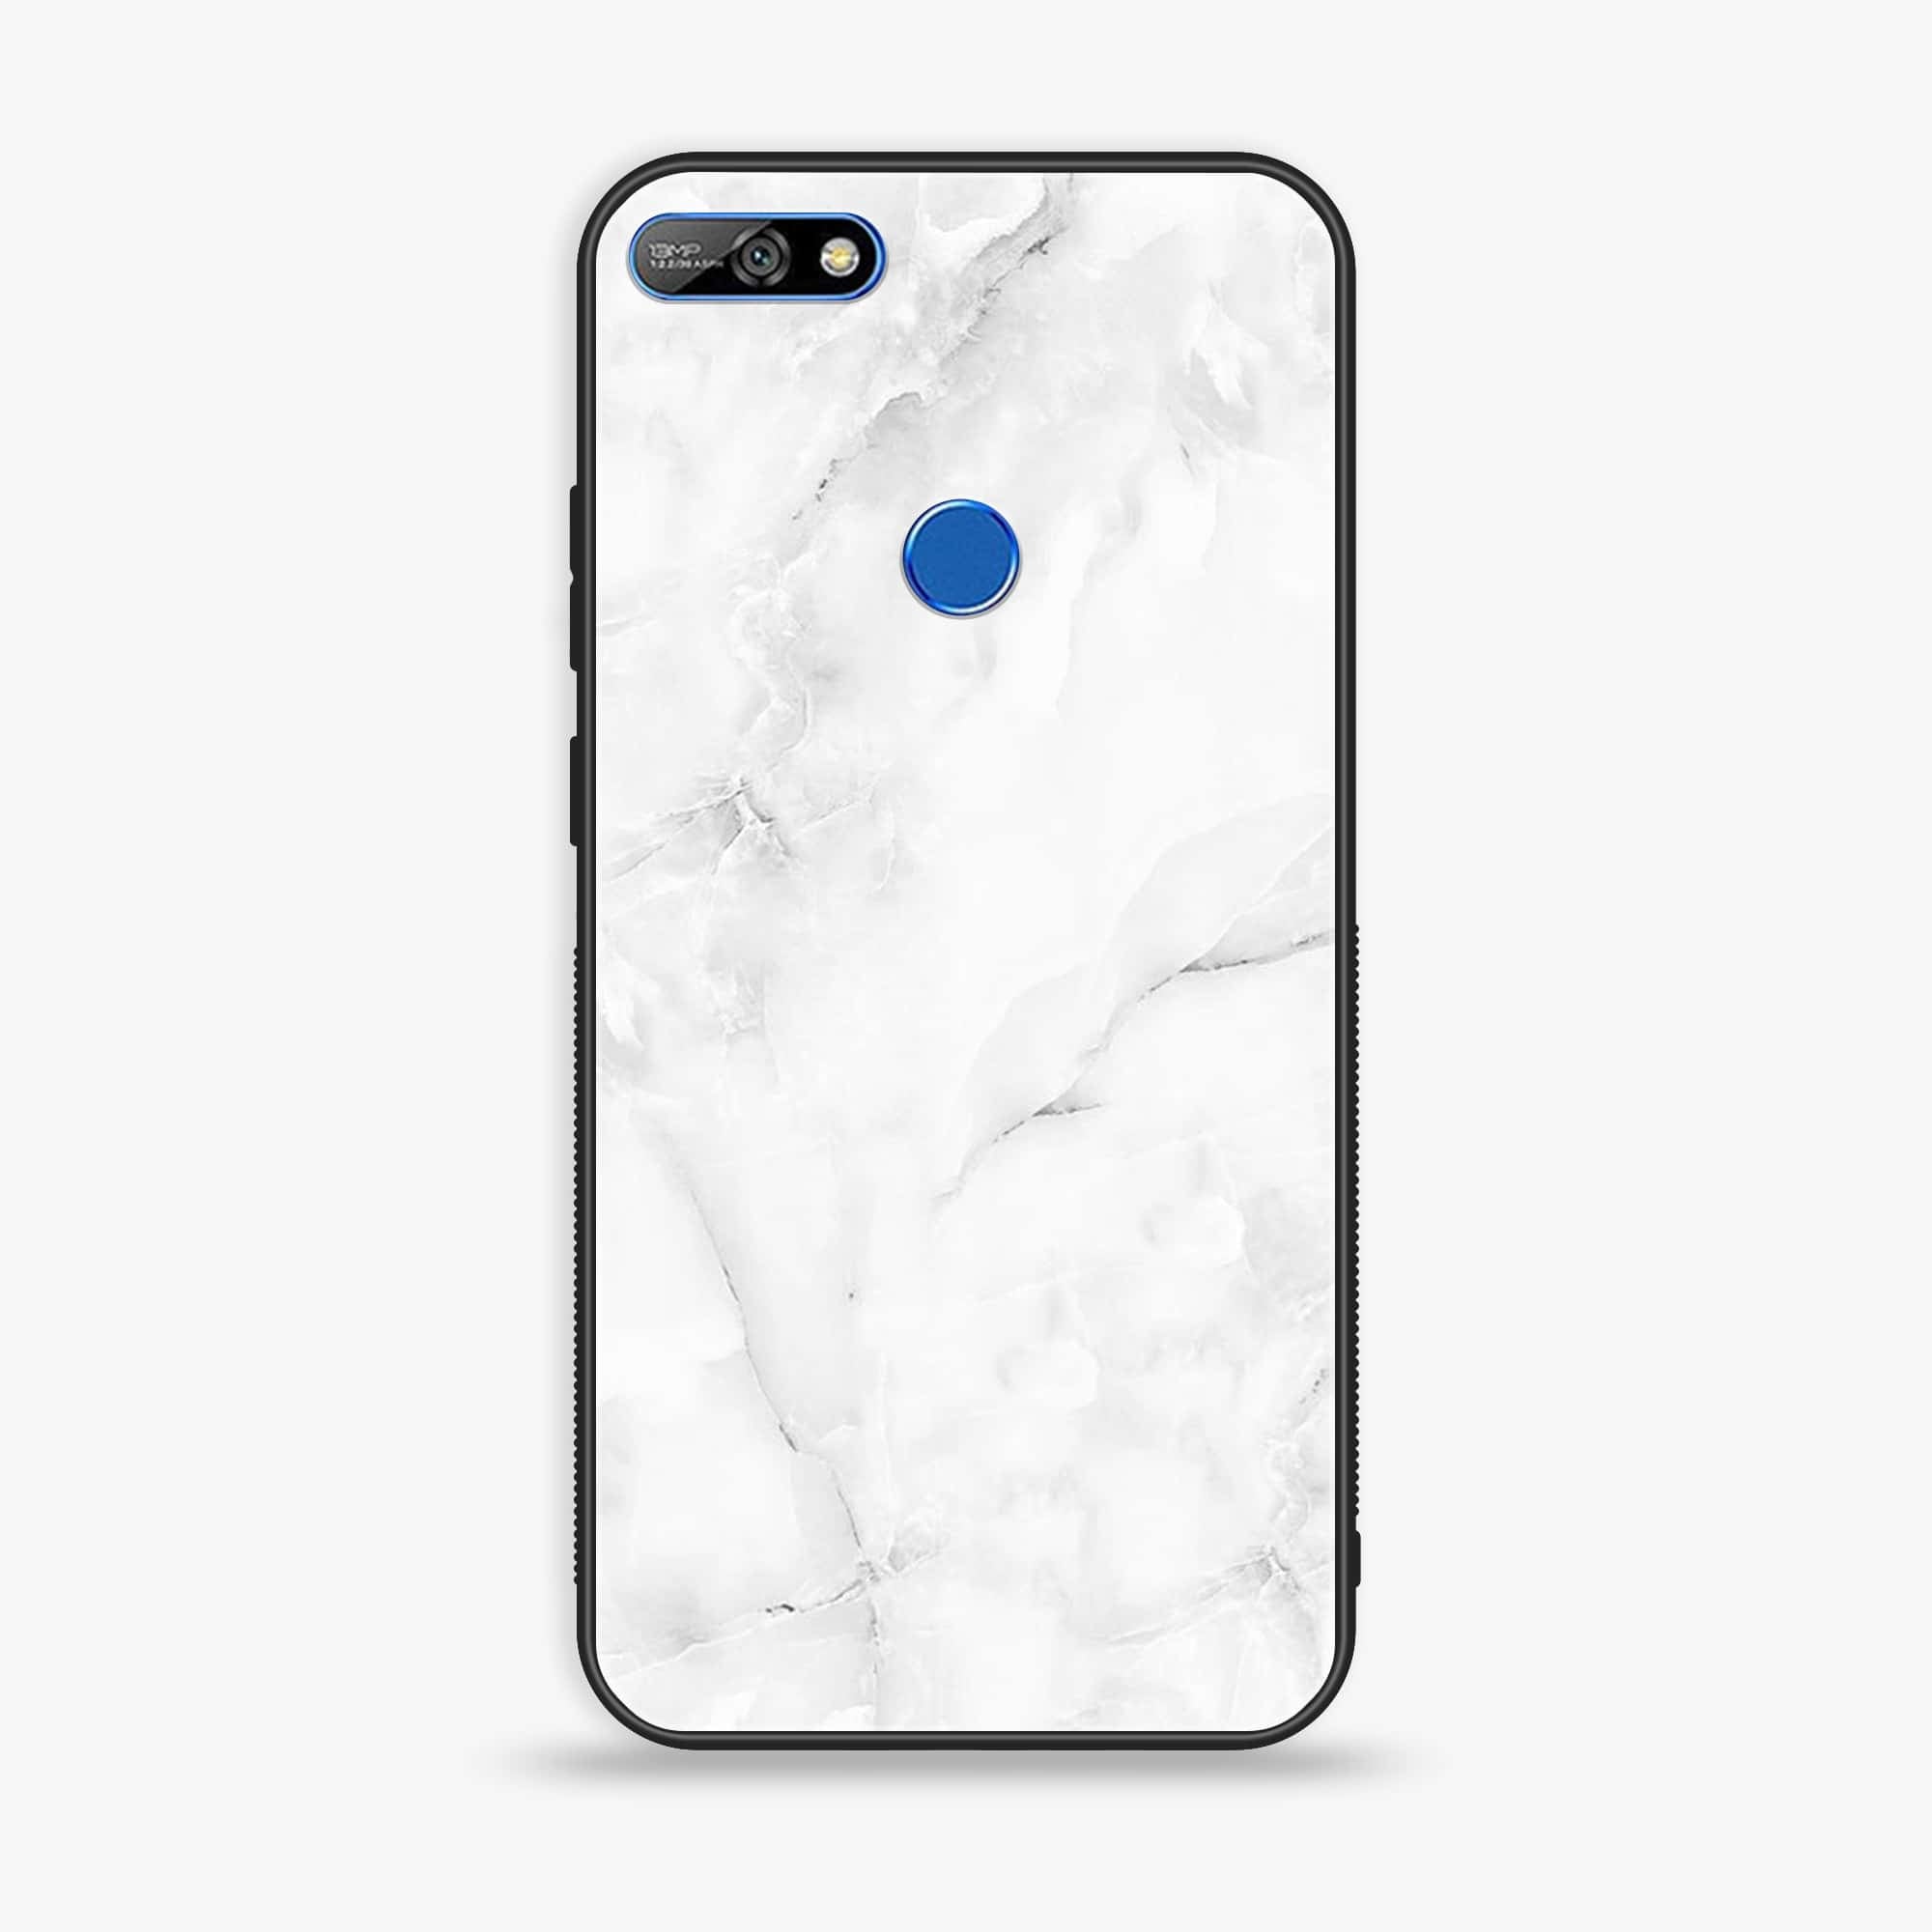 Huawei Y7 Prime (2018) - White Marble Series - Premium Printed Glass soft Bumper shock Proof Case